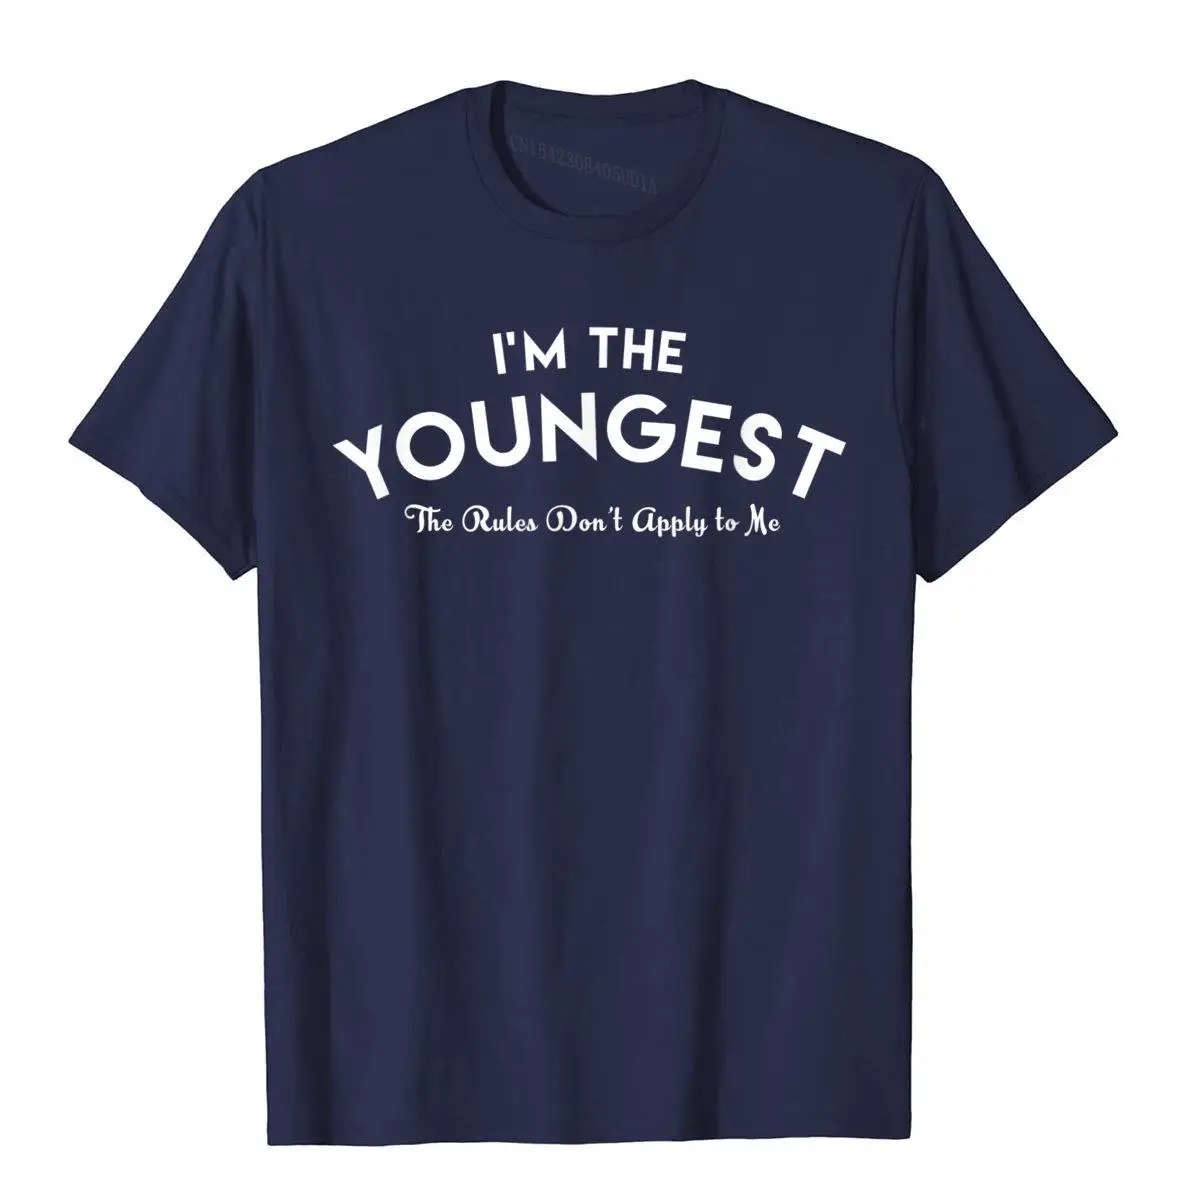 I'm The Youngest Child Shirt Funny Rules Don't Apply Gift__A10455navy